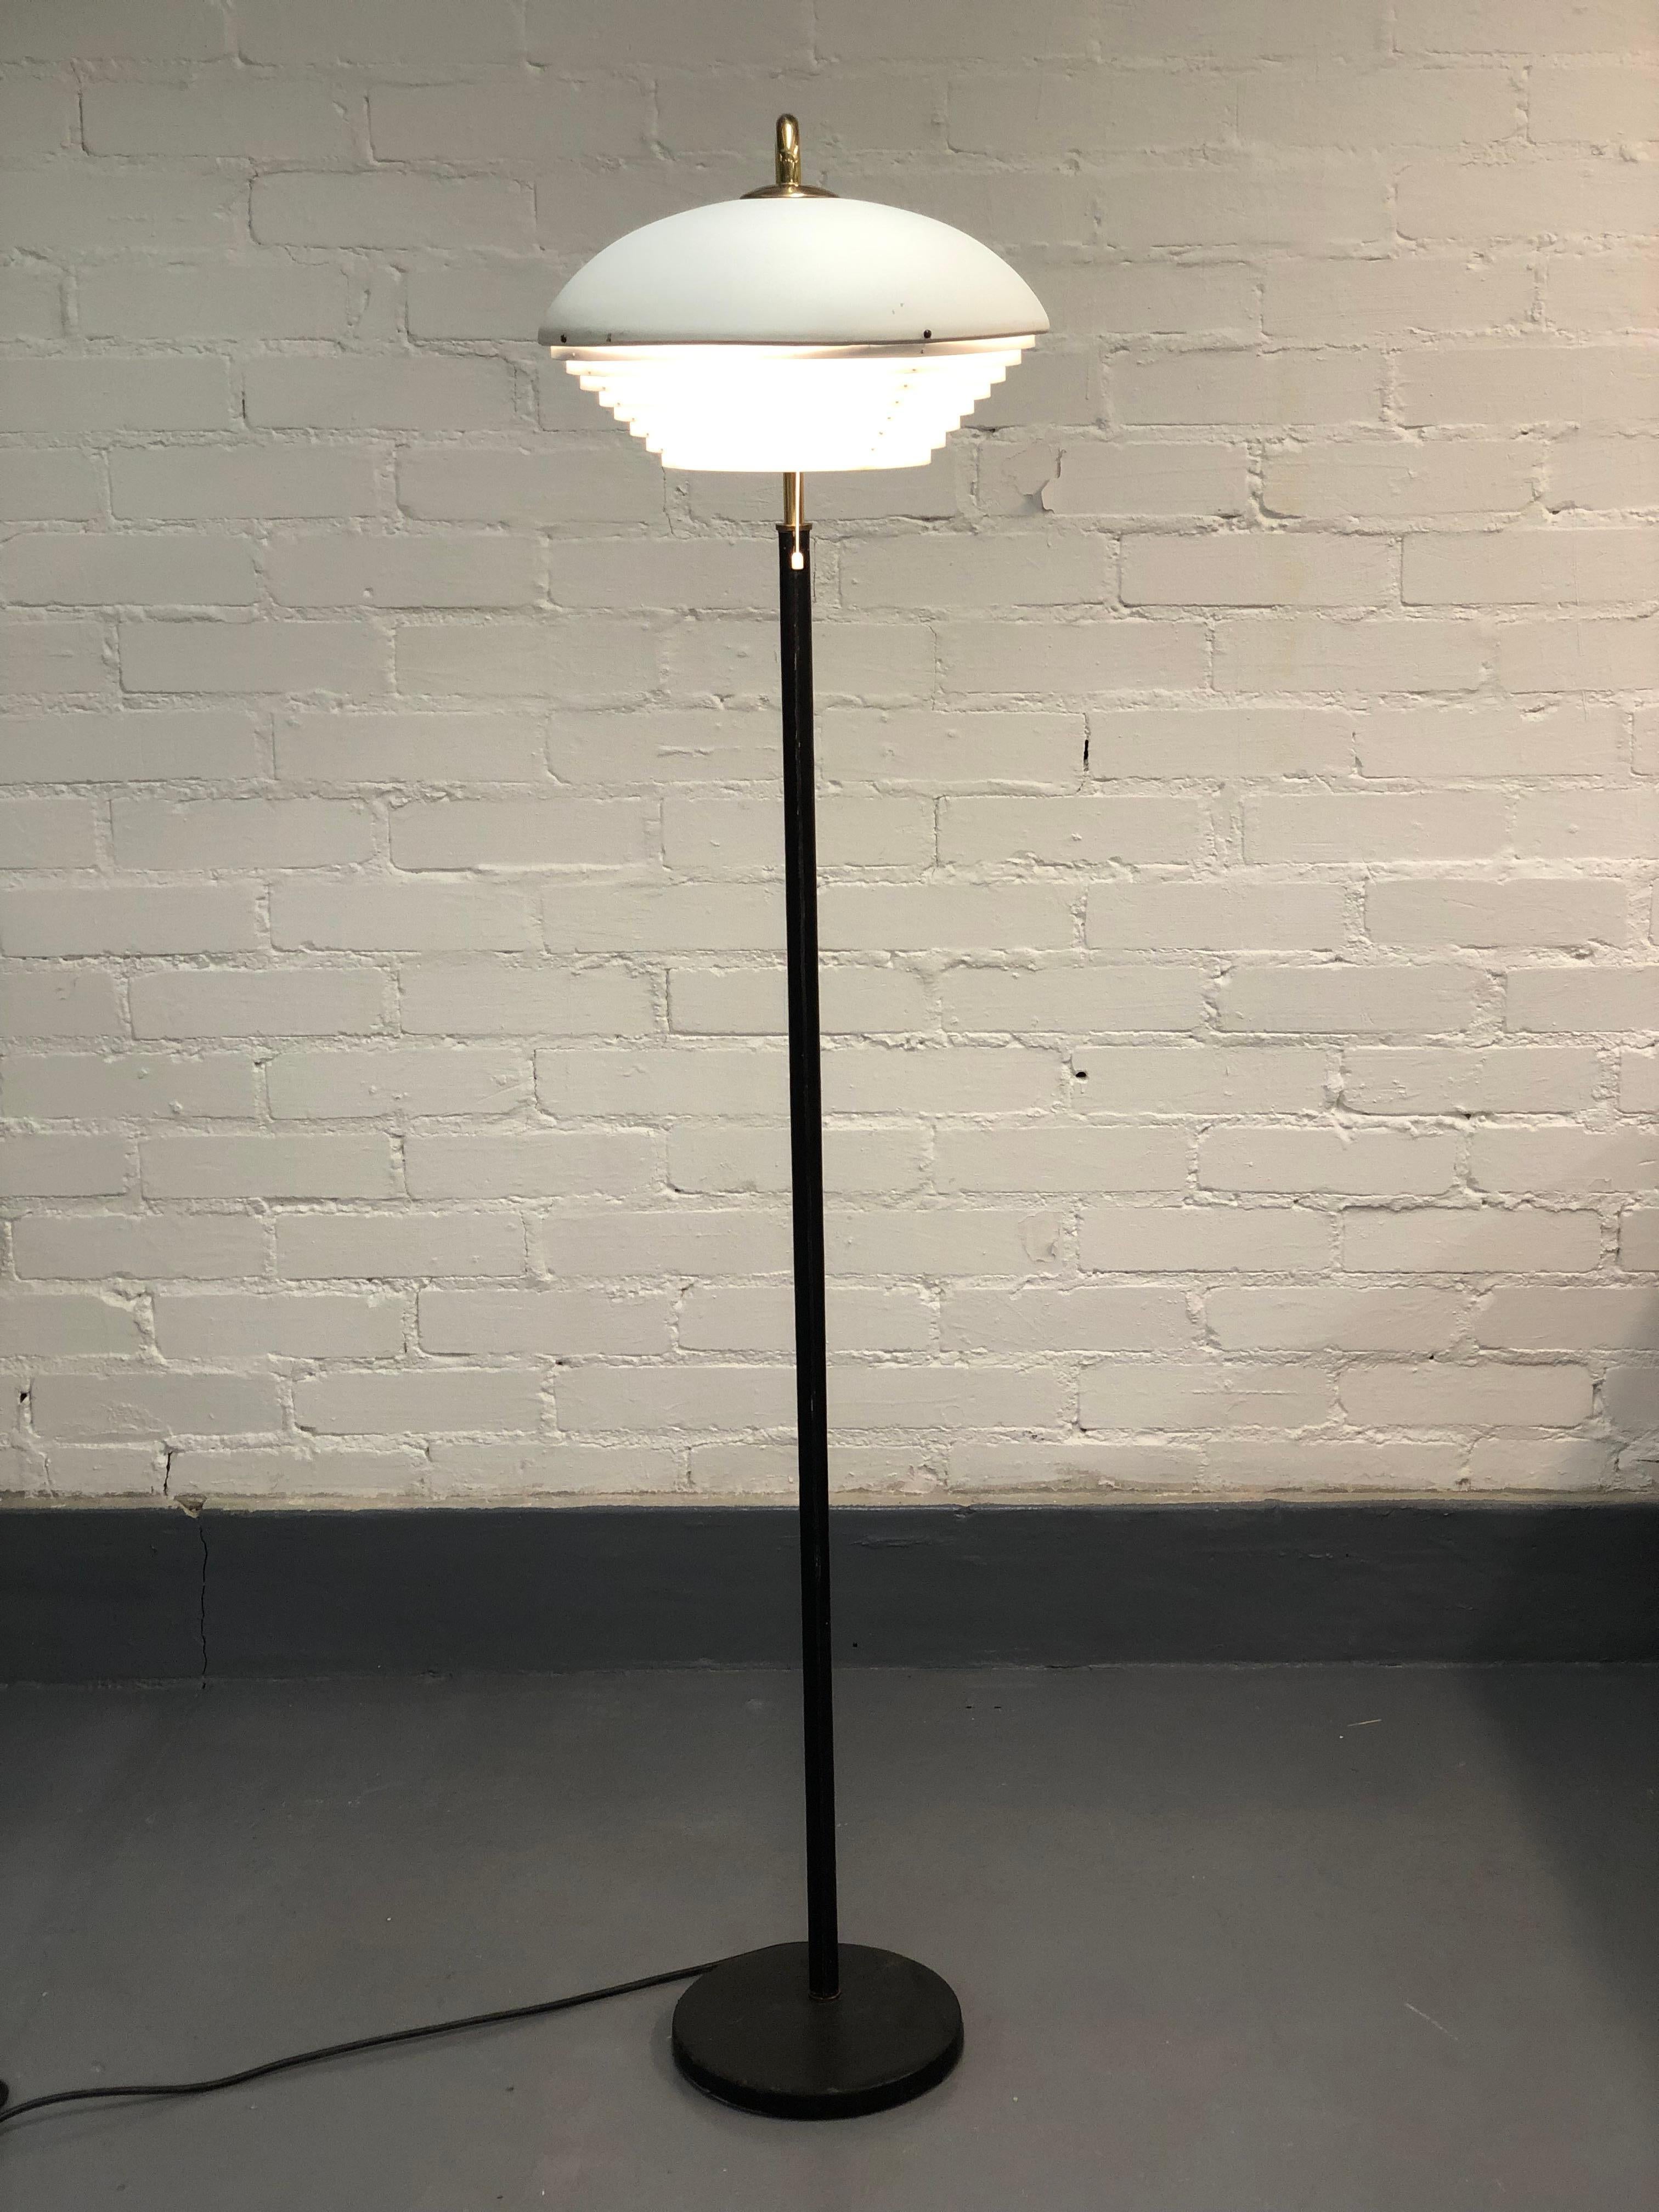 This iconic floor lamp designed by Alvar Aalto comes with a leather stem, brass details and a white metal nest on the top. The brilliance of this lamp comes from the simplicity and the way all of these different materials come together and form a